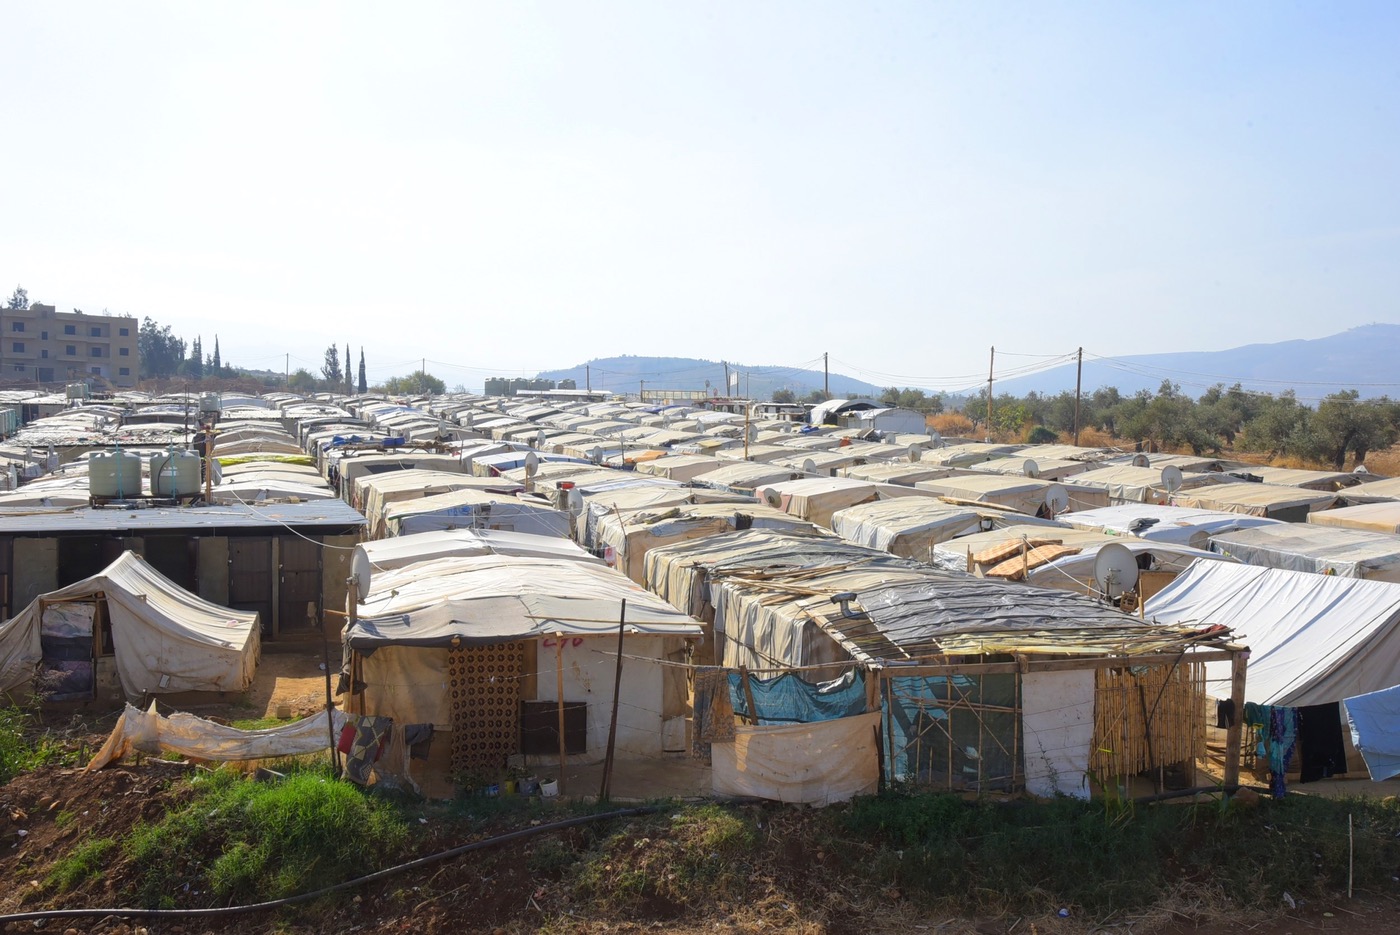 Not far from Tel Abbas, the larger Reyhanli refugee camp in Akkar, pictured on November 11, 2016, has housed hundreds of refugees. (Muhammed Salih/Anadolu Agency)